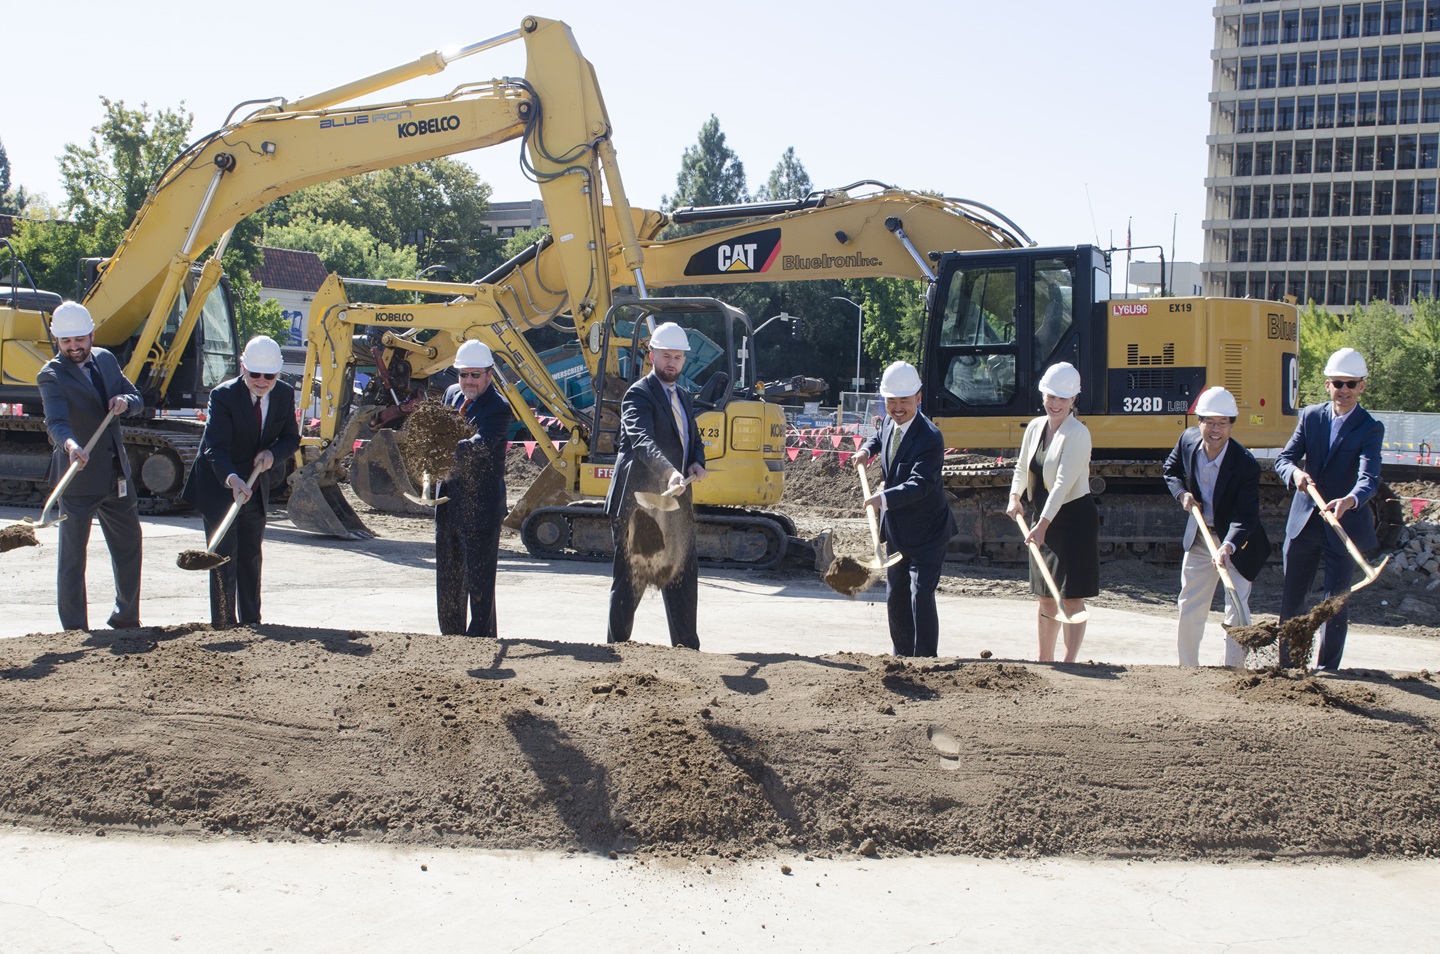 Officials move dirt at groundbreaking event